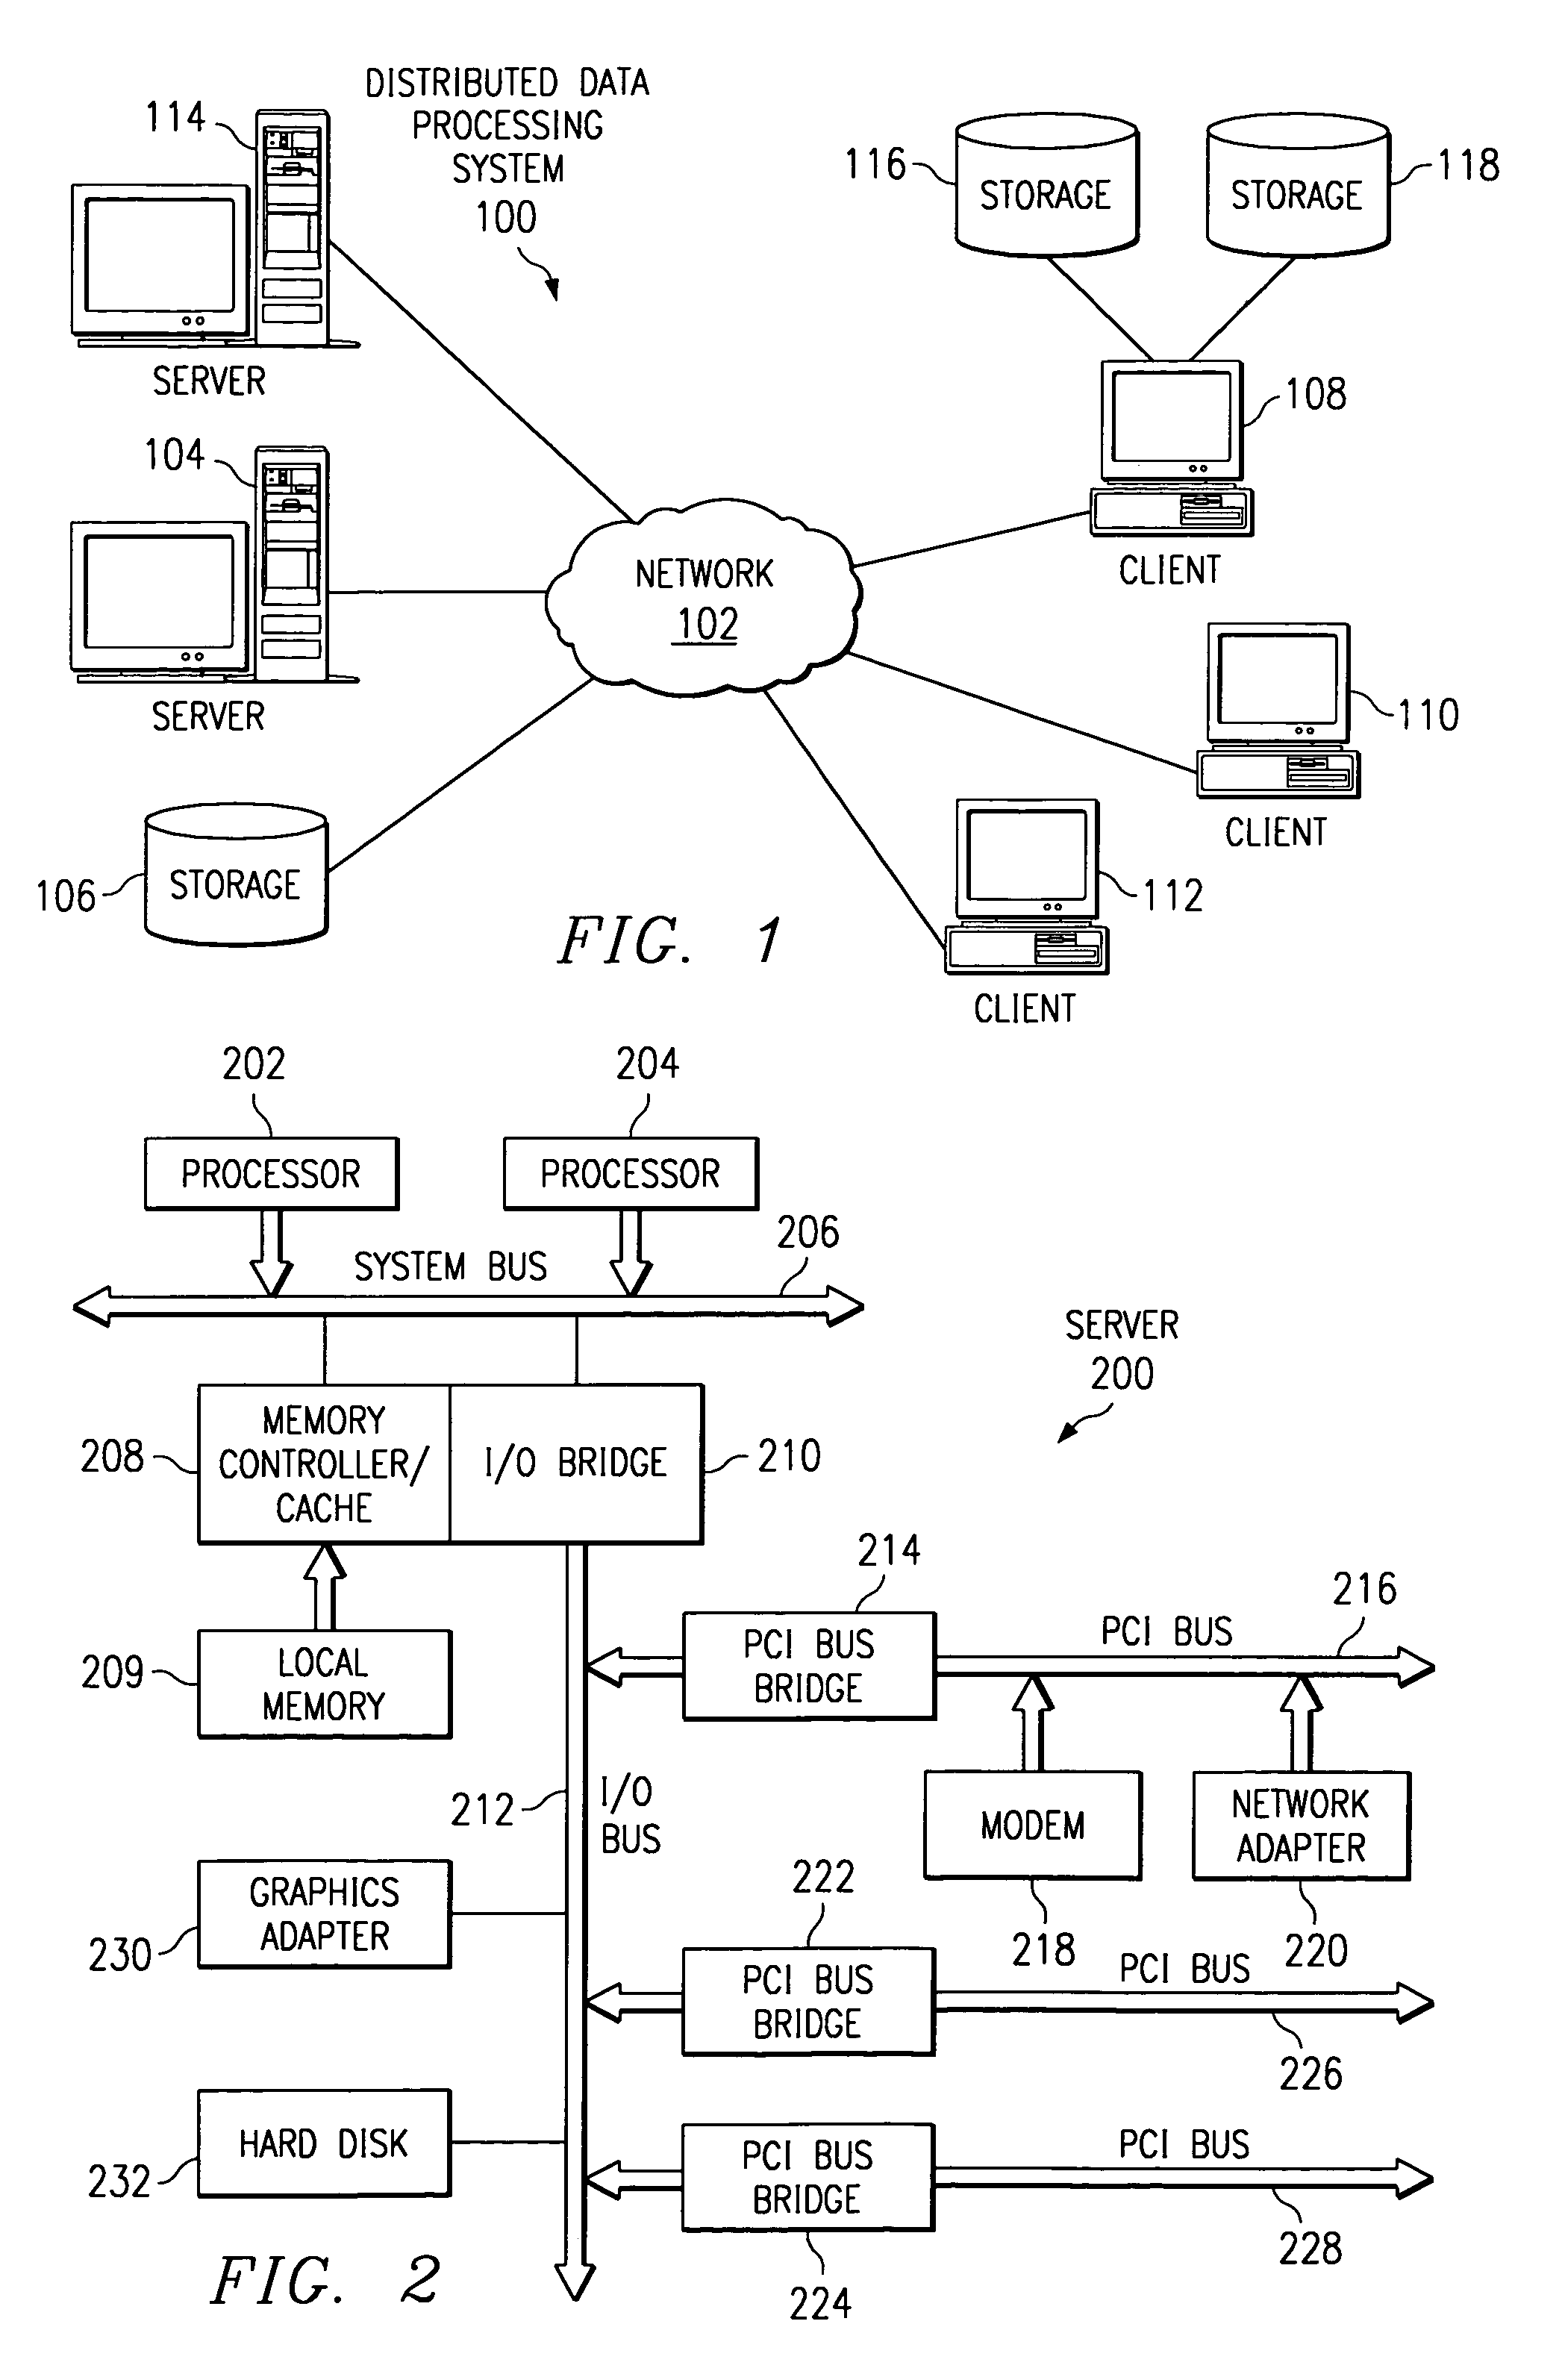 Method and apparatus for adding data attributes to e-mail messages to enhance the analysis of delivery failures